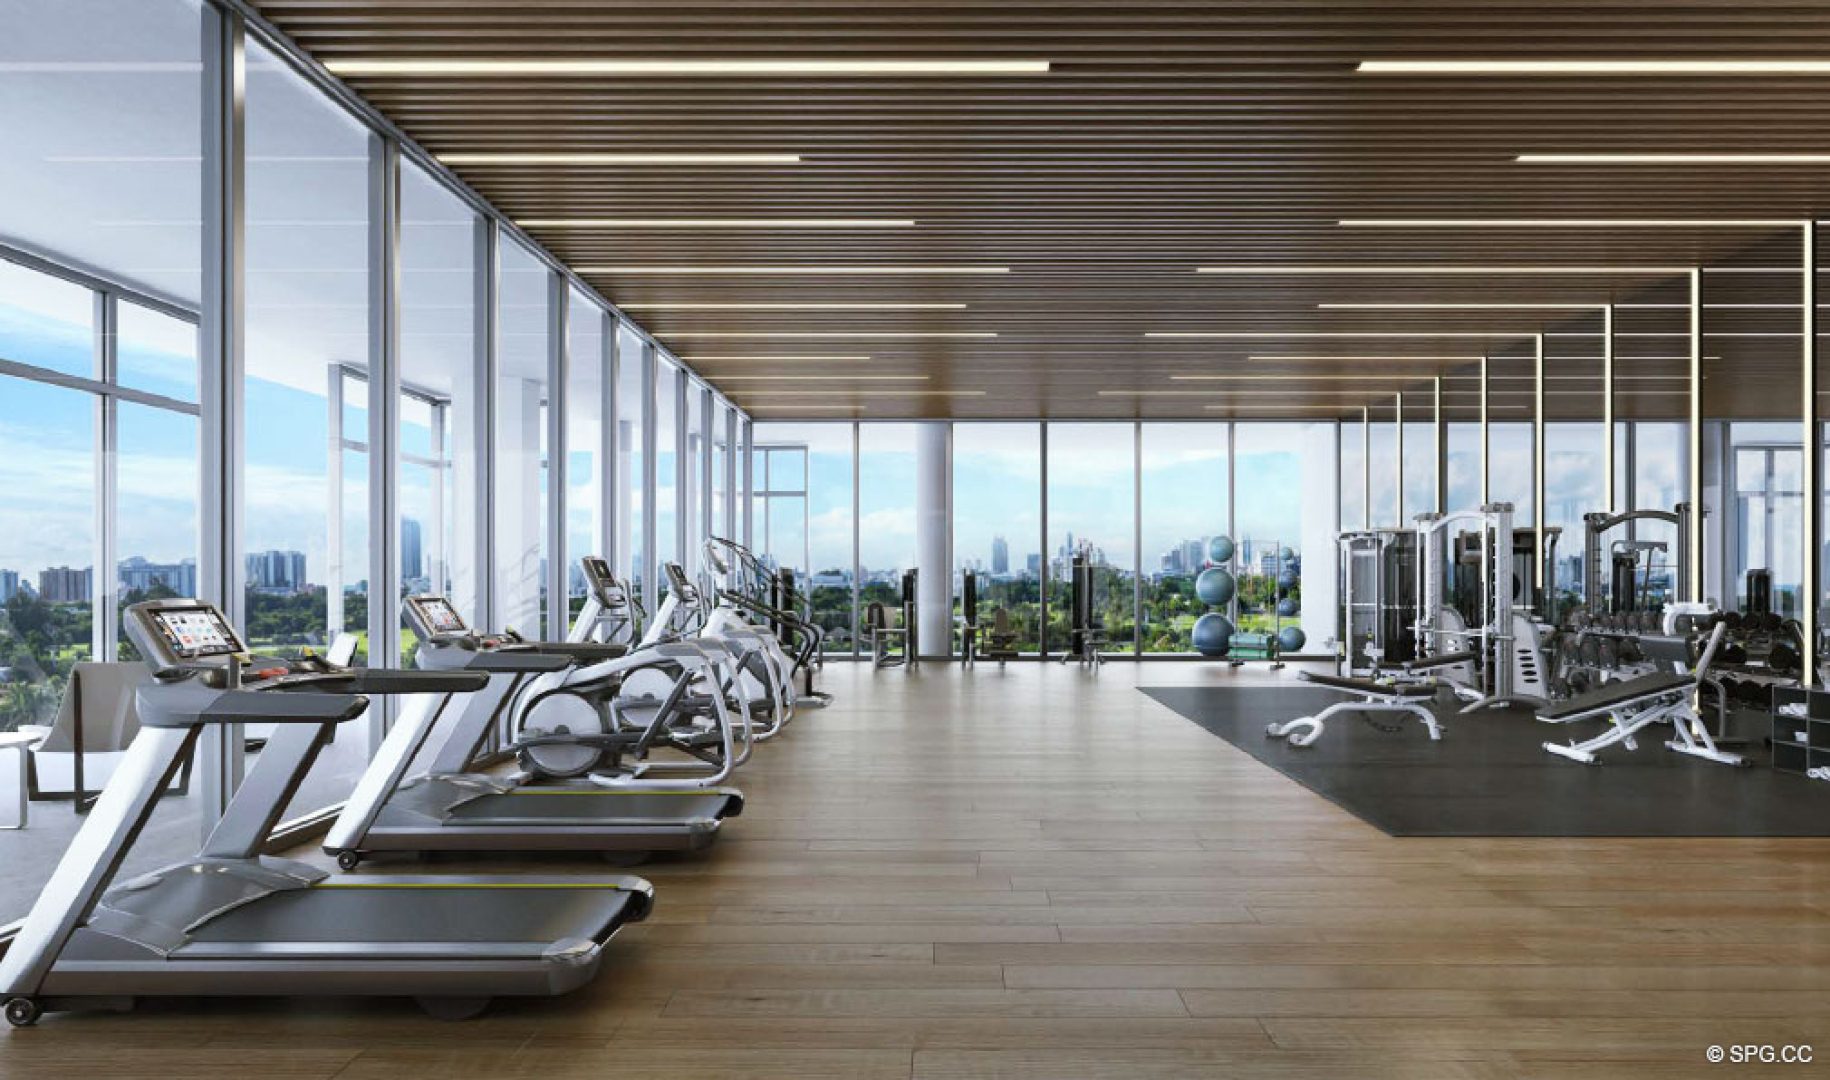 State of the Art Fitness Center at 3900 Alton, Luxury Waterfront Condos in Miami Beach, Florida 33140